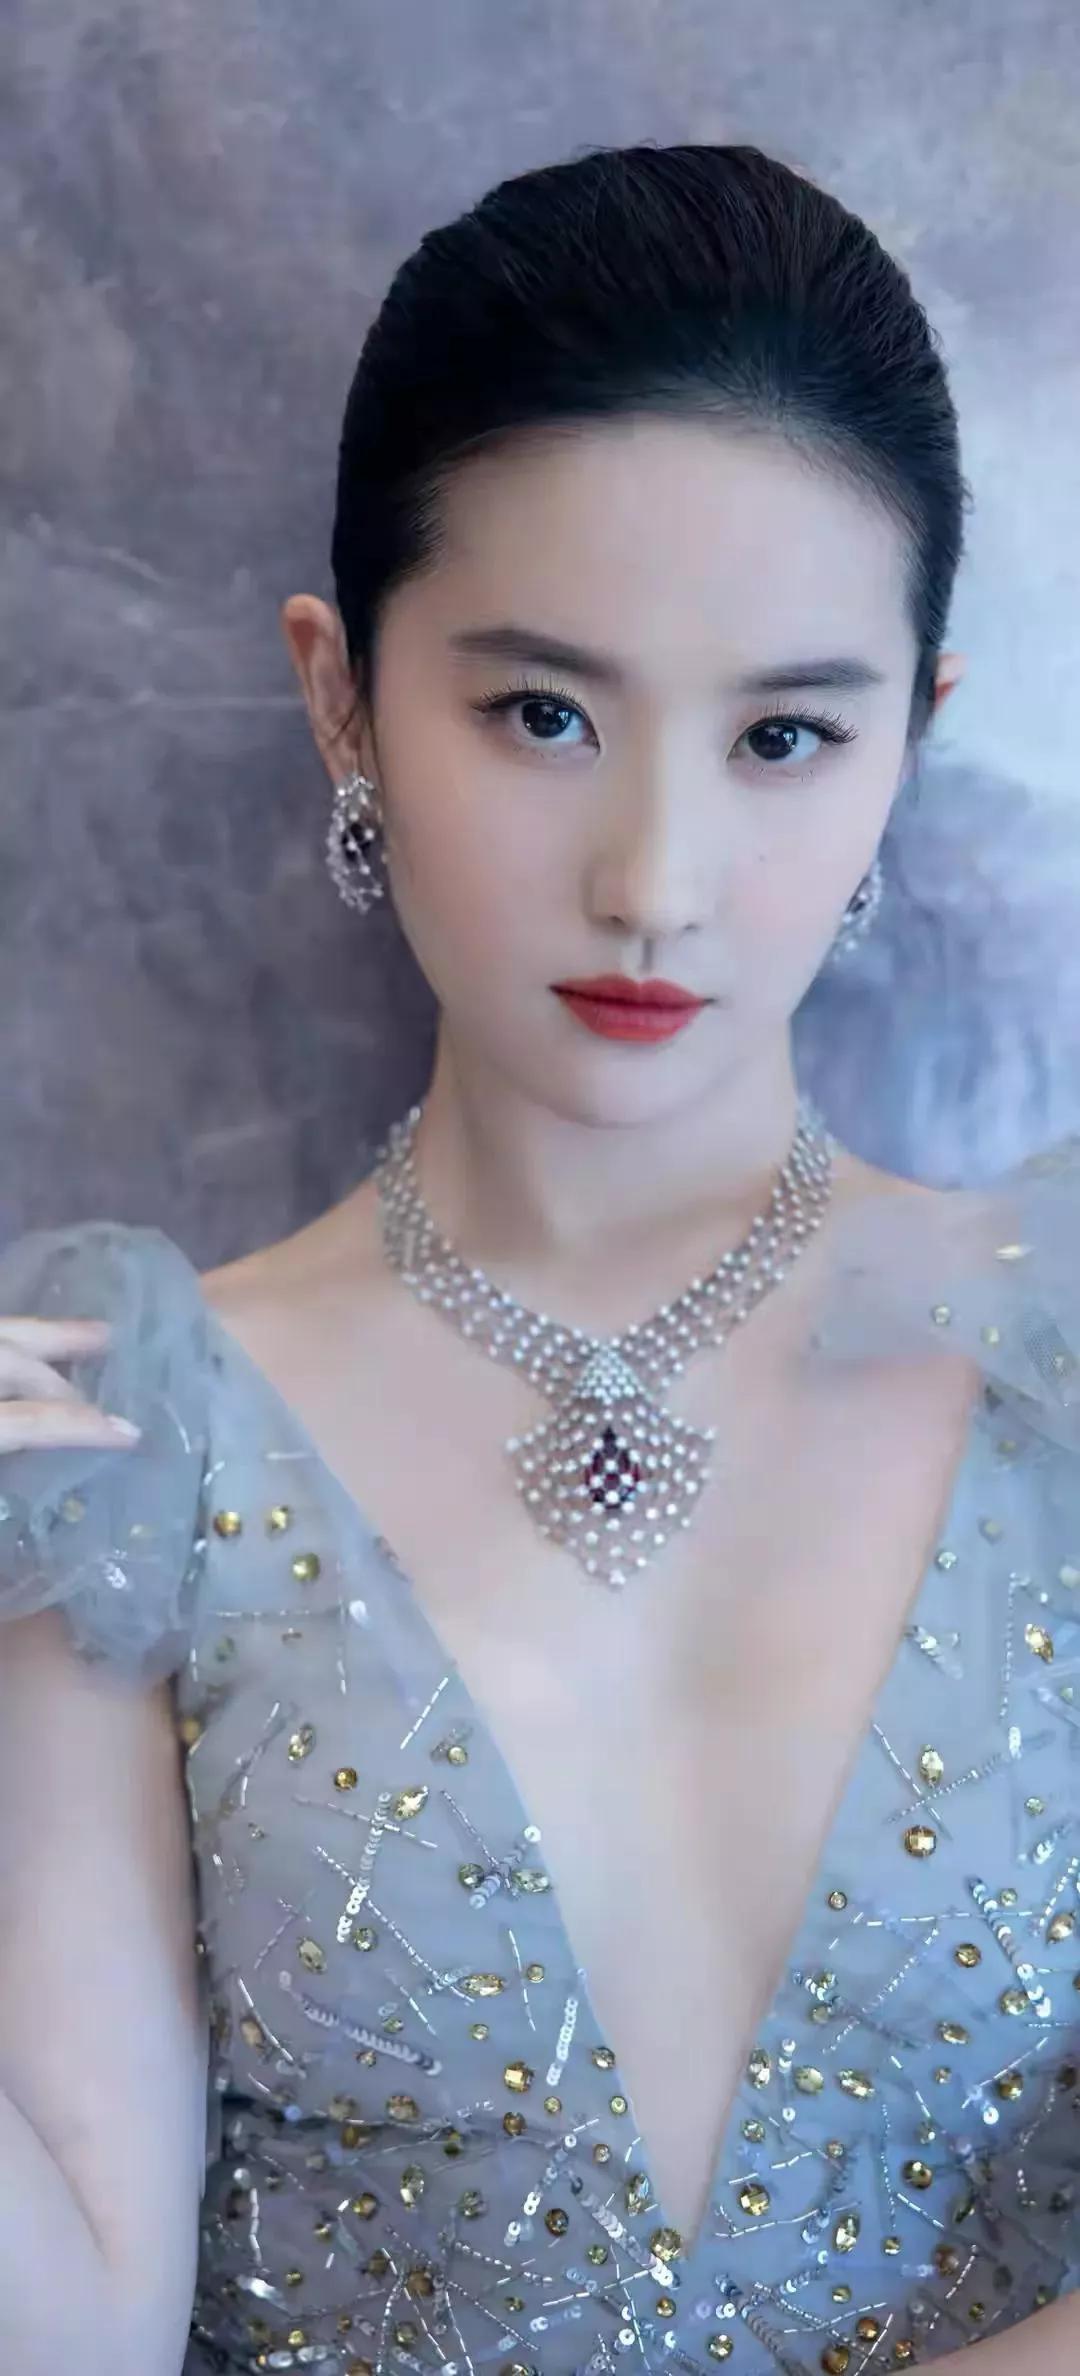 Fifty pictures of the fairy sister Liu Yifei - iNEWS